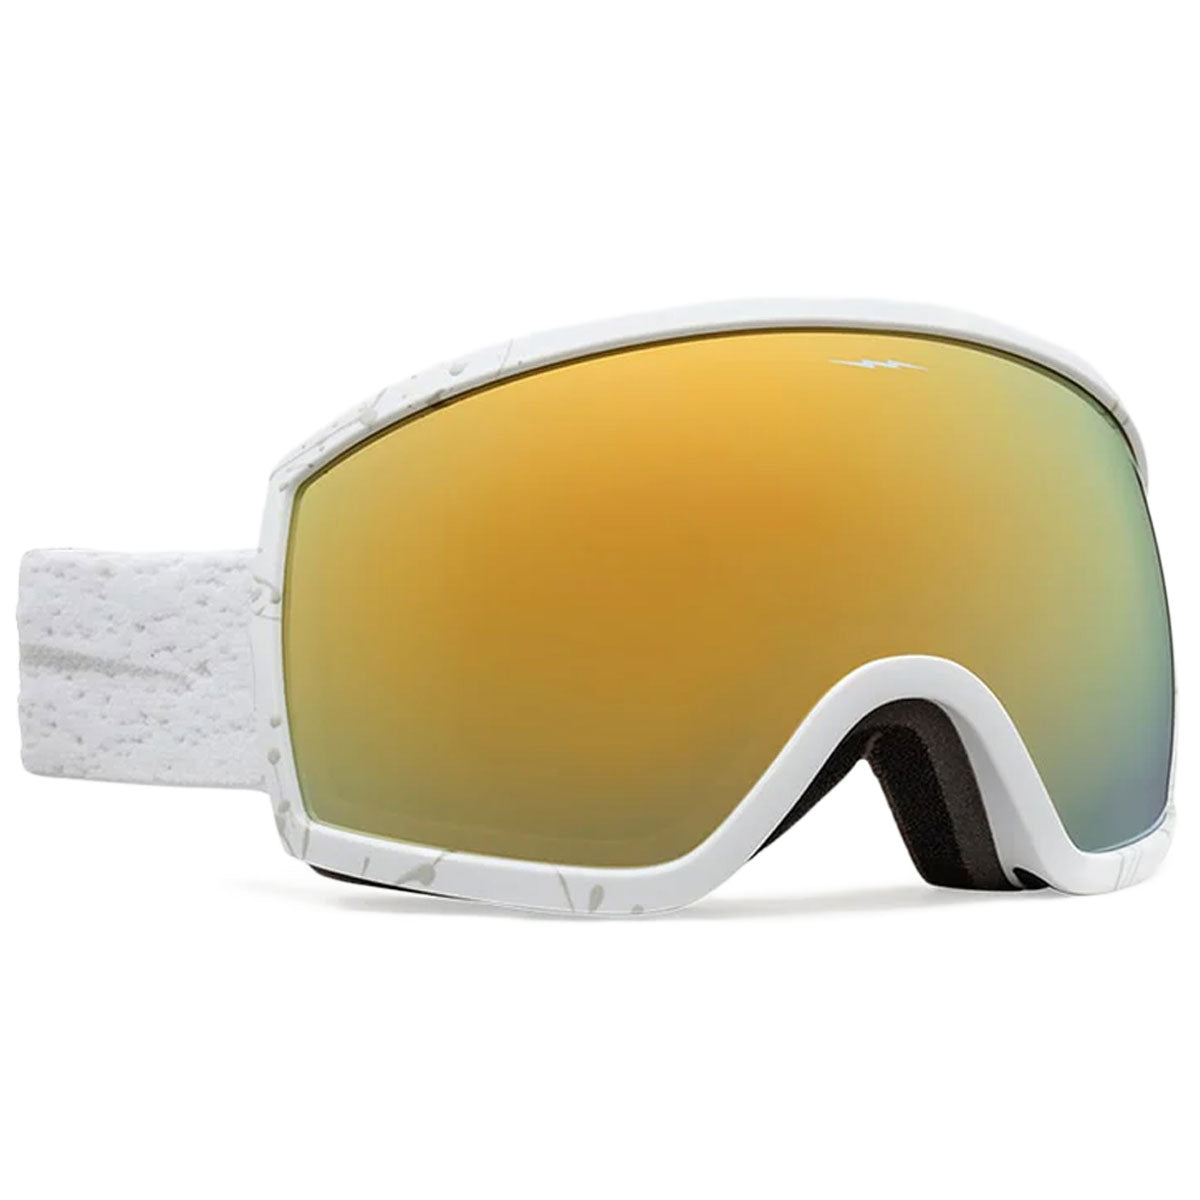 Electric EG2-T.S Snowboard Goggles - Matte Speckled White/Auburn Gold image 1